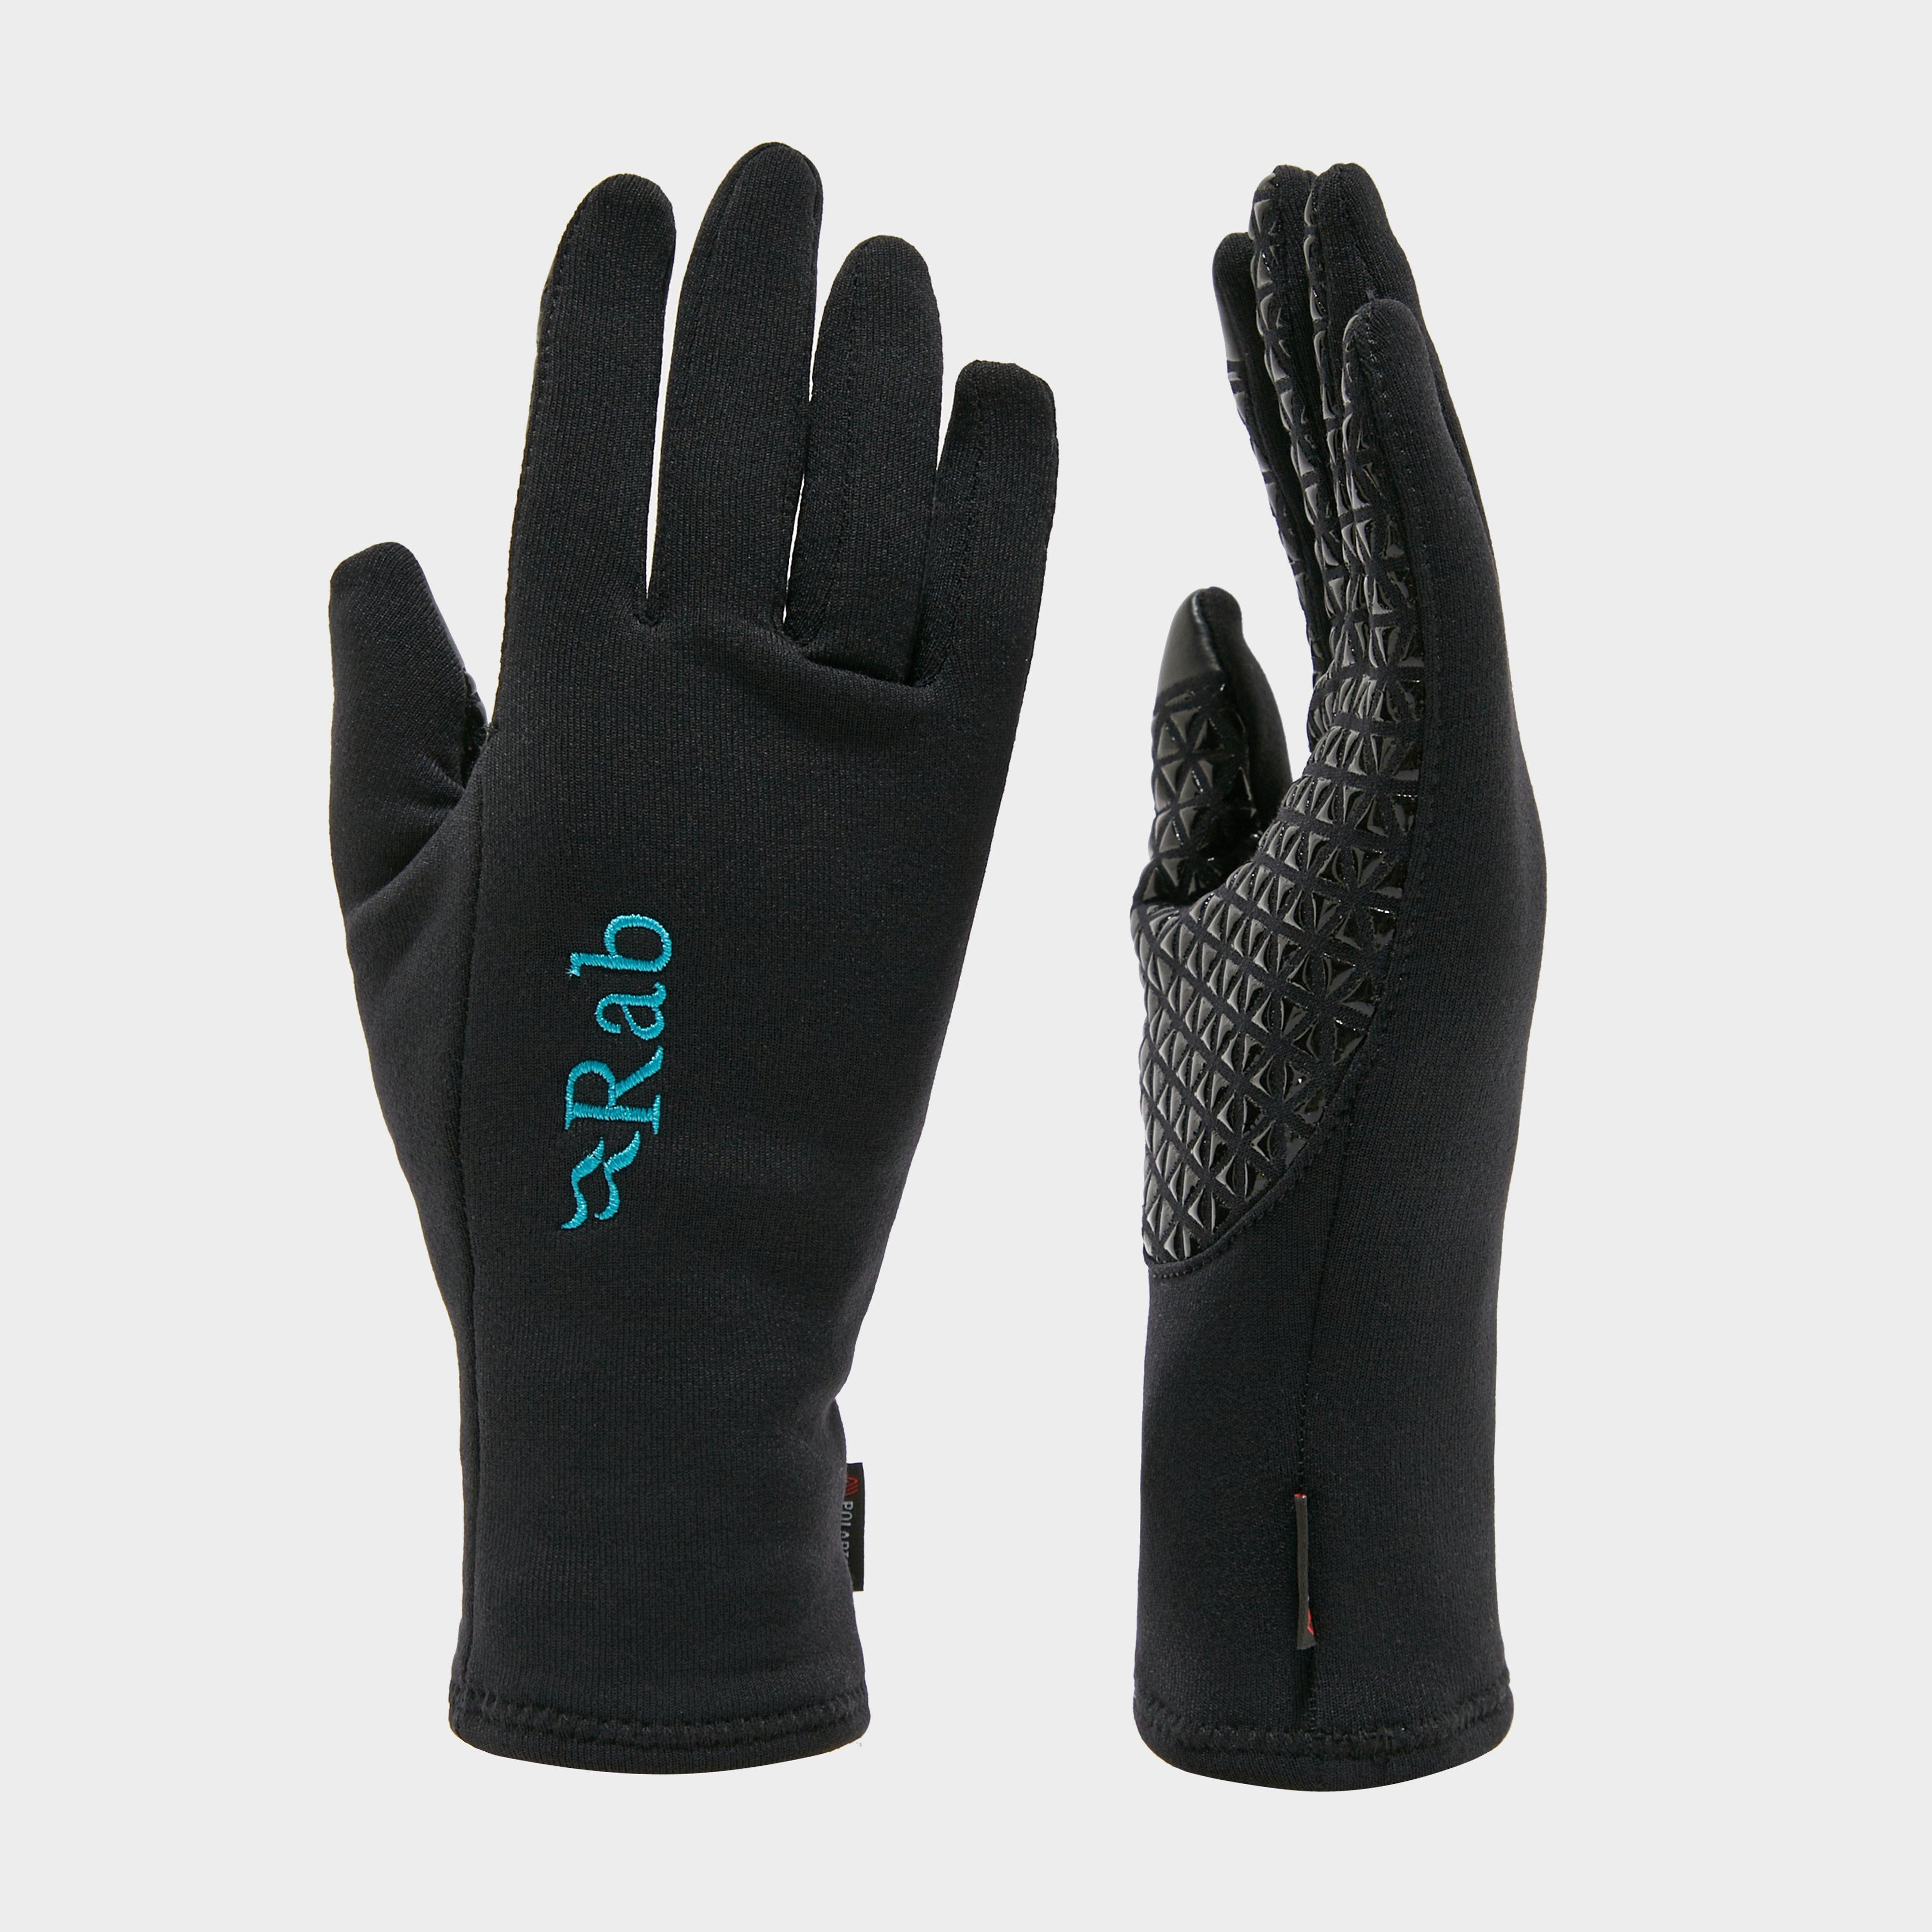 Rab Womens Power Stretch Contact Grip Gloves - Glove/glove  Glove/glove